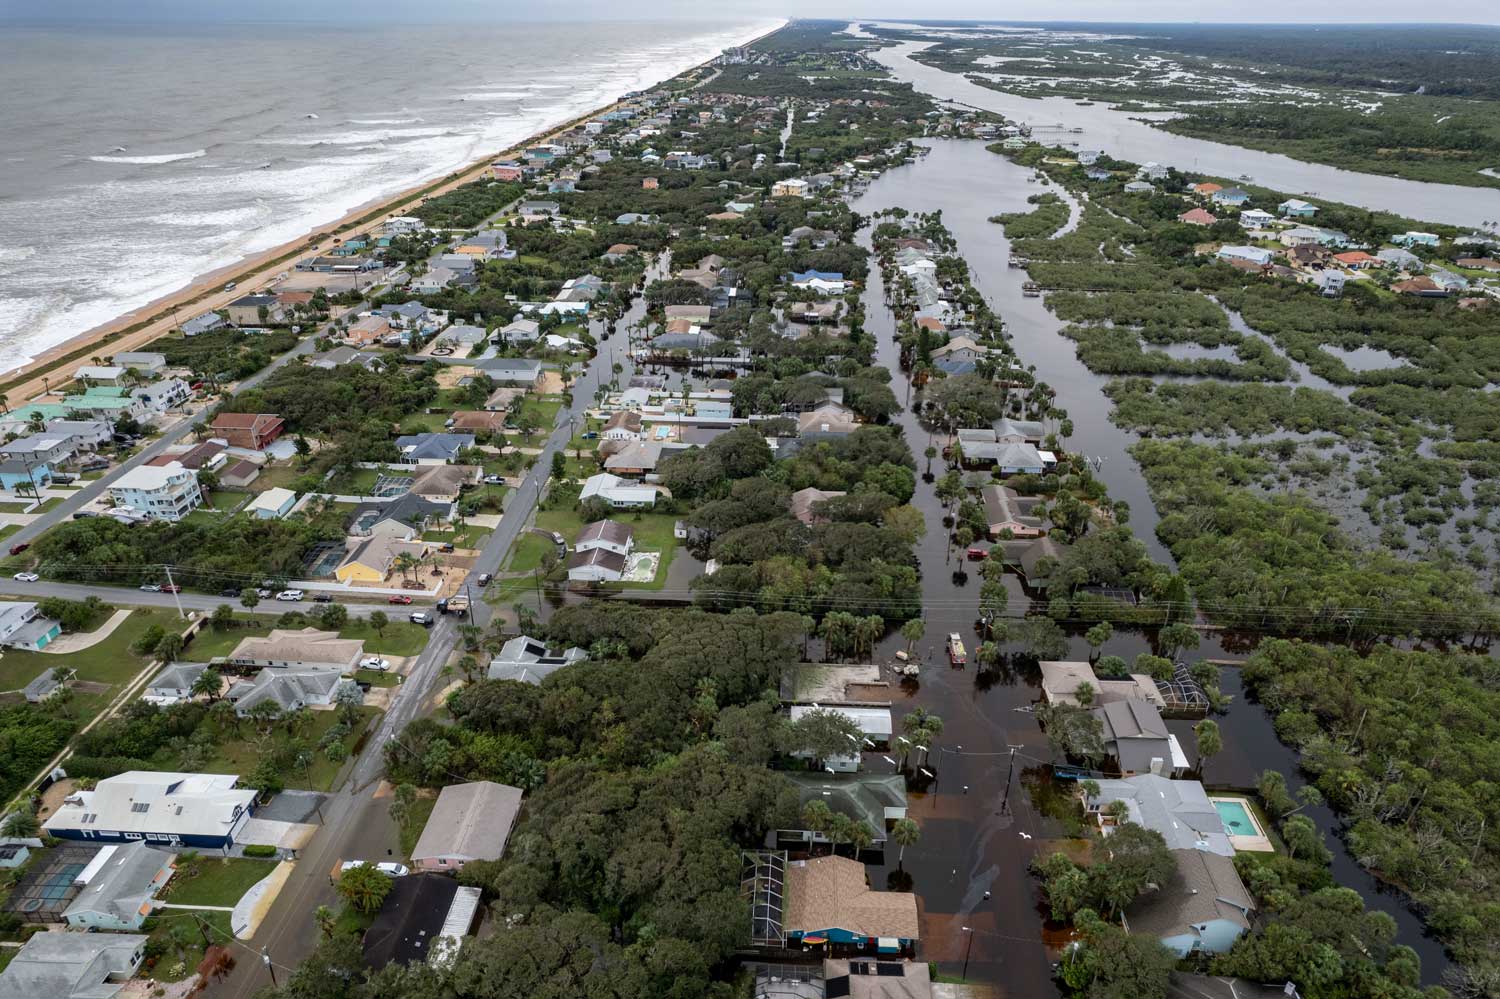 A waterlogged Flagler Beach in the wake of Hurricane Ian Friday, in a drone image. (© AJ Neste for FlaglerLive)